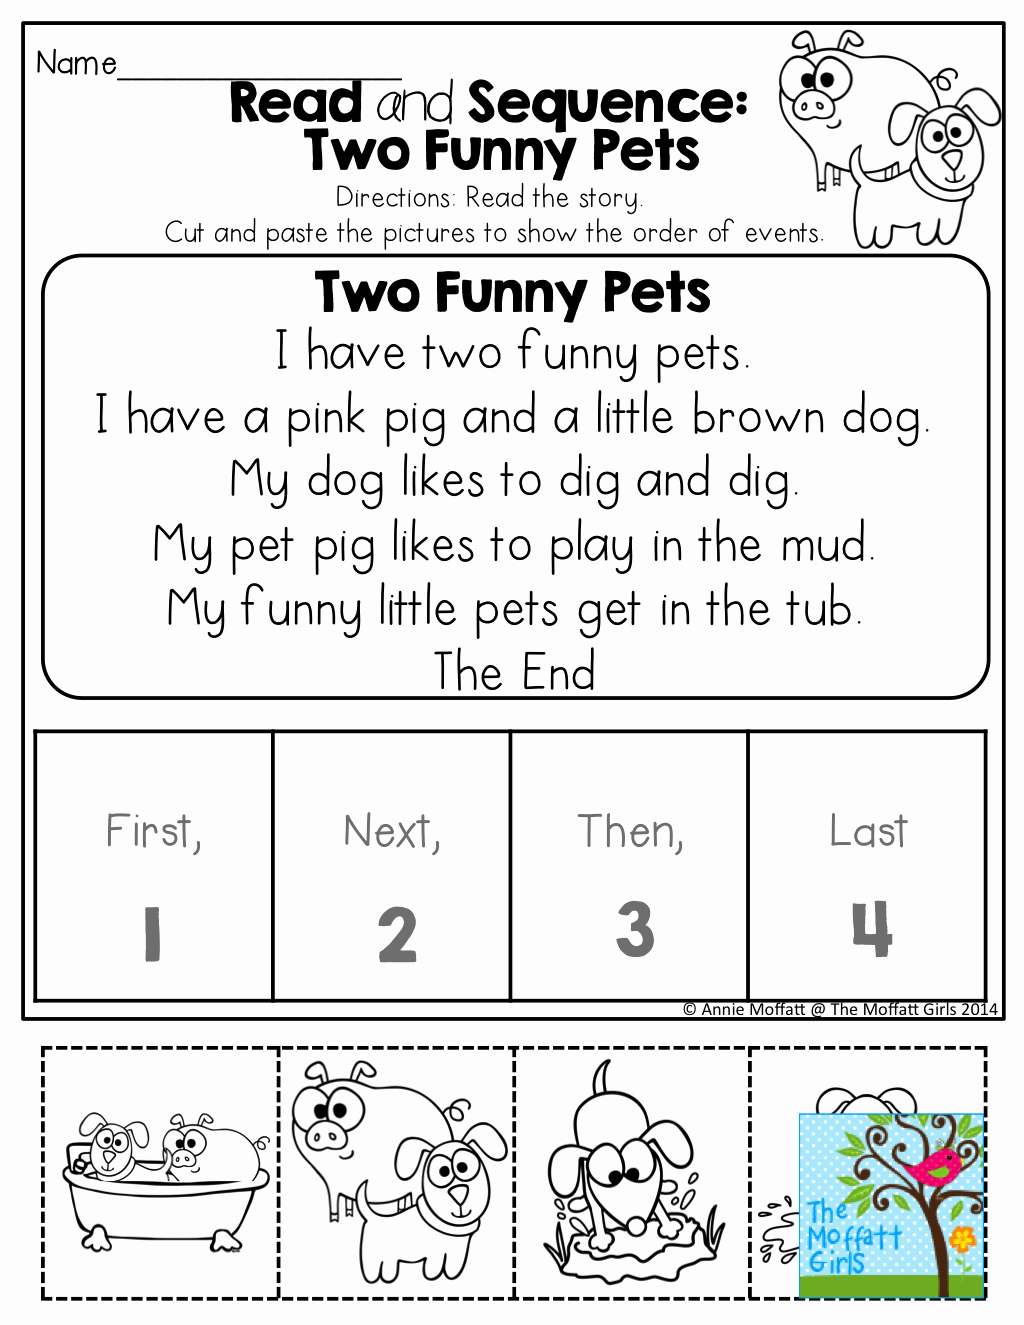 Story Sequencing Worksheets for Kindergarten Best Of Read and Sequence Build Fluency and Prehension